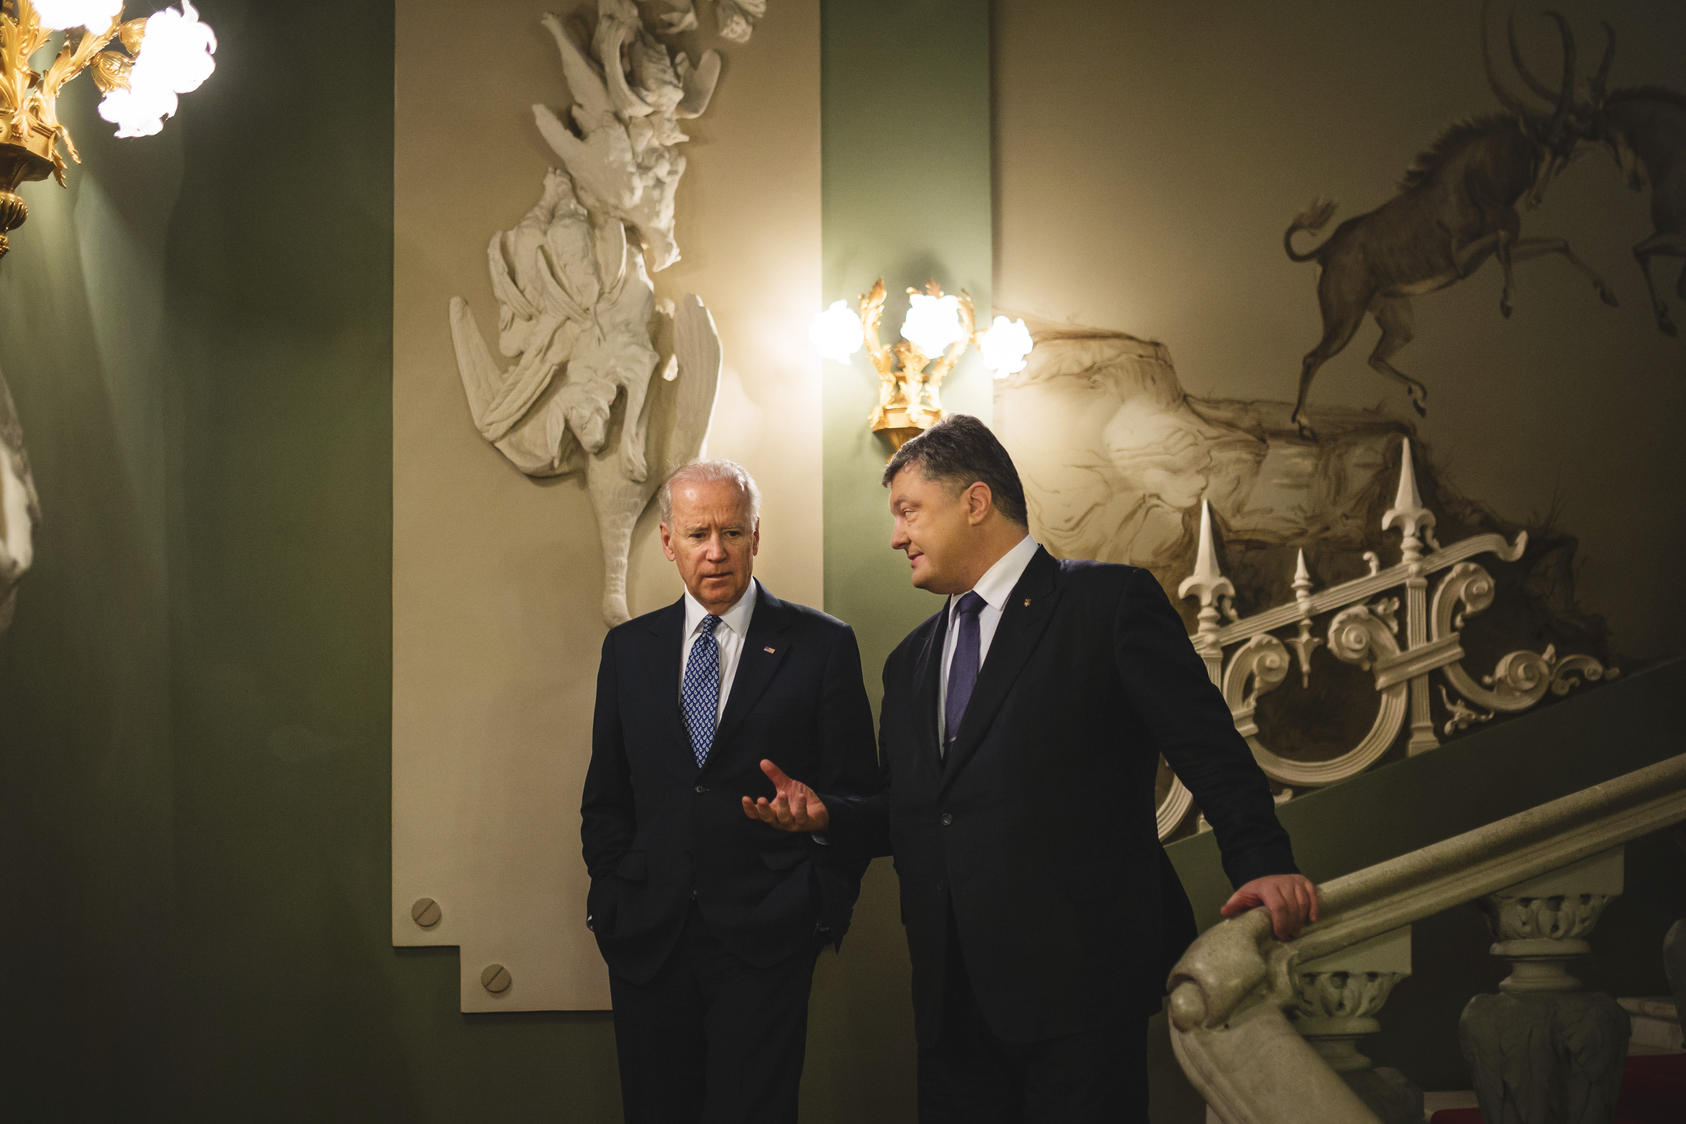 Ukrainian President Petro Poroshenko, right, and Vice President Joe Biden talk during a meeting in Kiev, Ukraine, Dec. 7, 2015. Biden assured Ukrainian leaders that Russian cooperation in Syria would not change America’s position, and also pressed them to do more to battle corruption. 